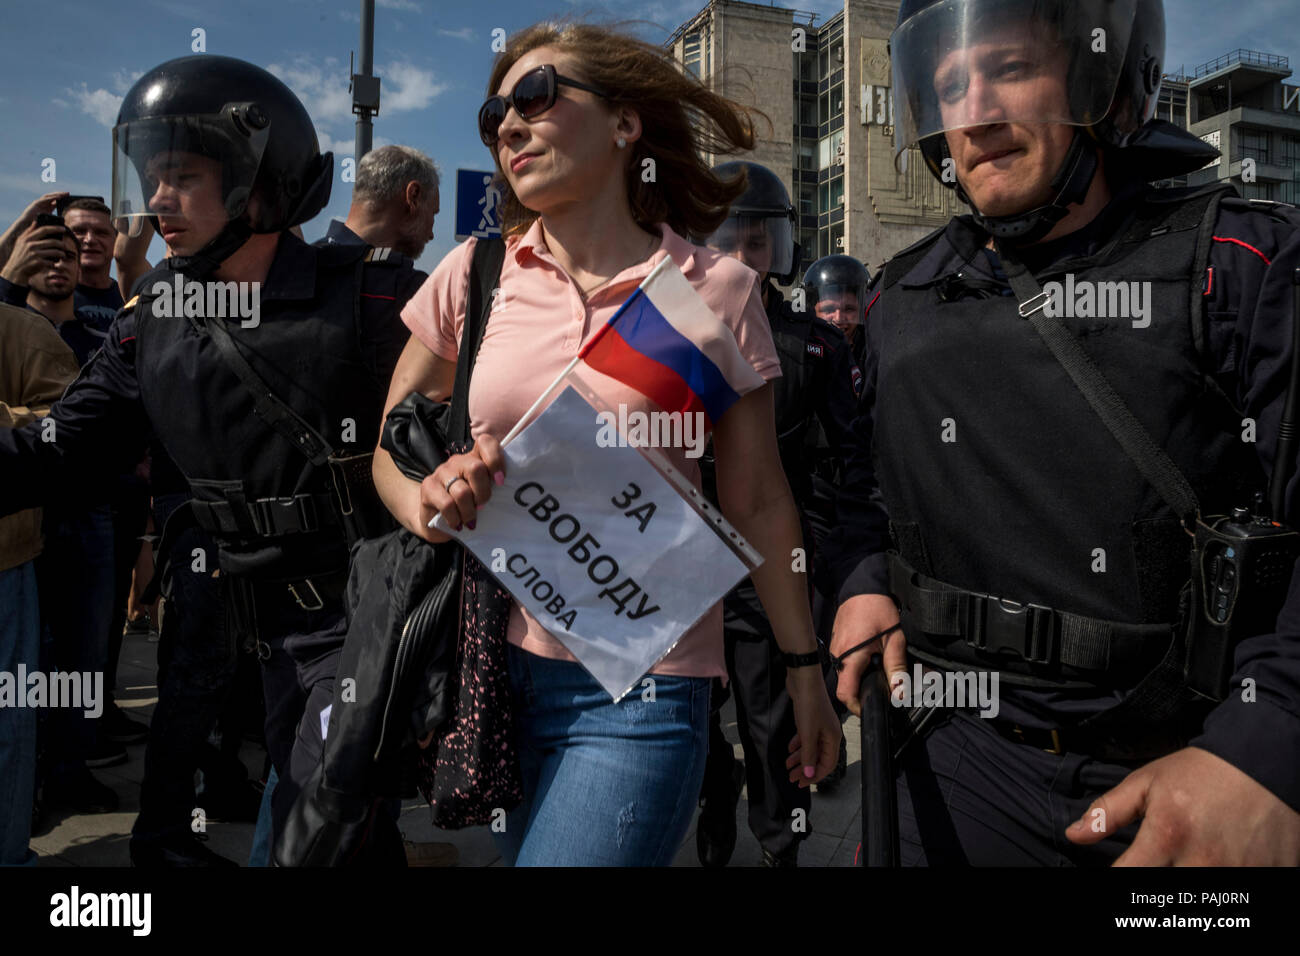 Detention of women with a banner with the inscription "For Freedom of Speech" during an opposition rally on Pushkin Square in center of Moscow, Russia Stock Photo